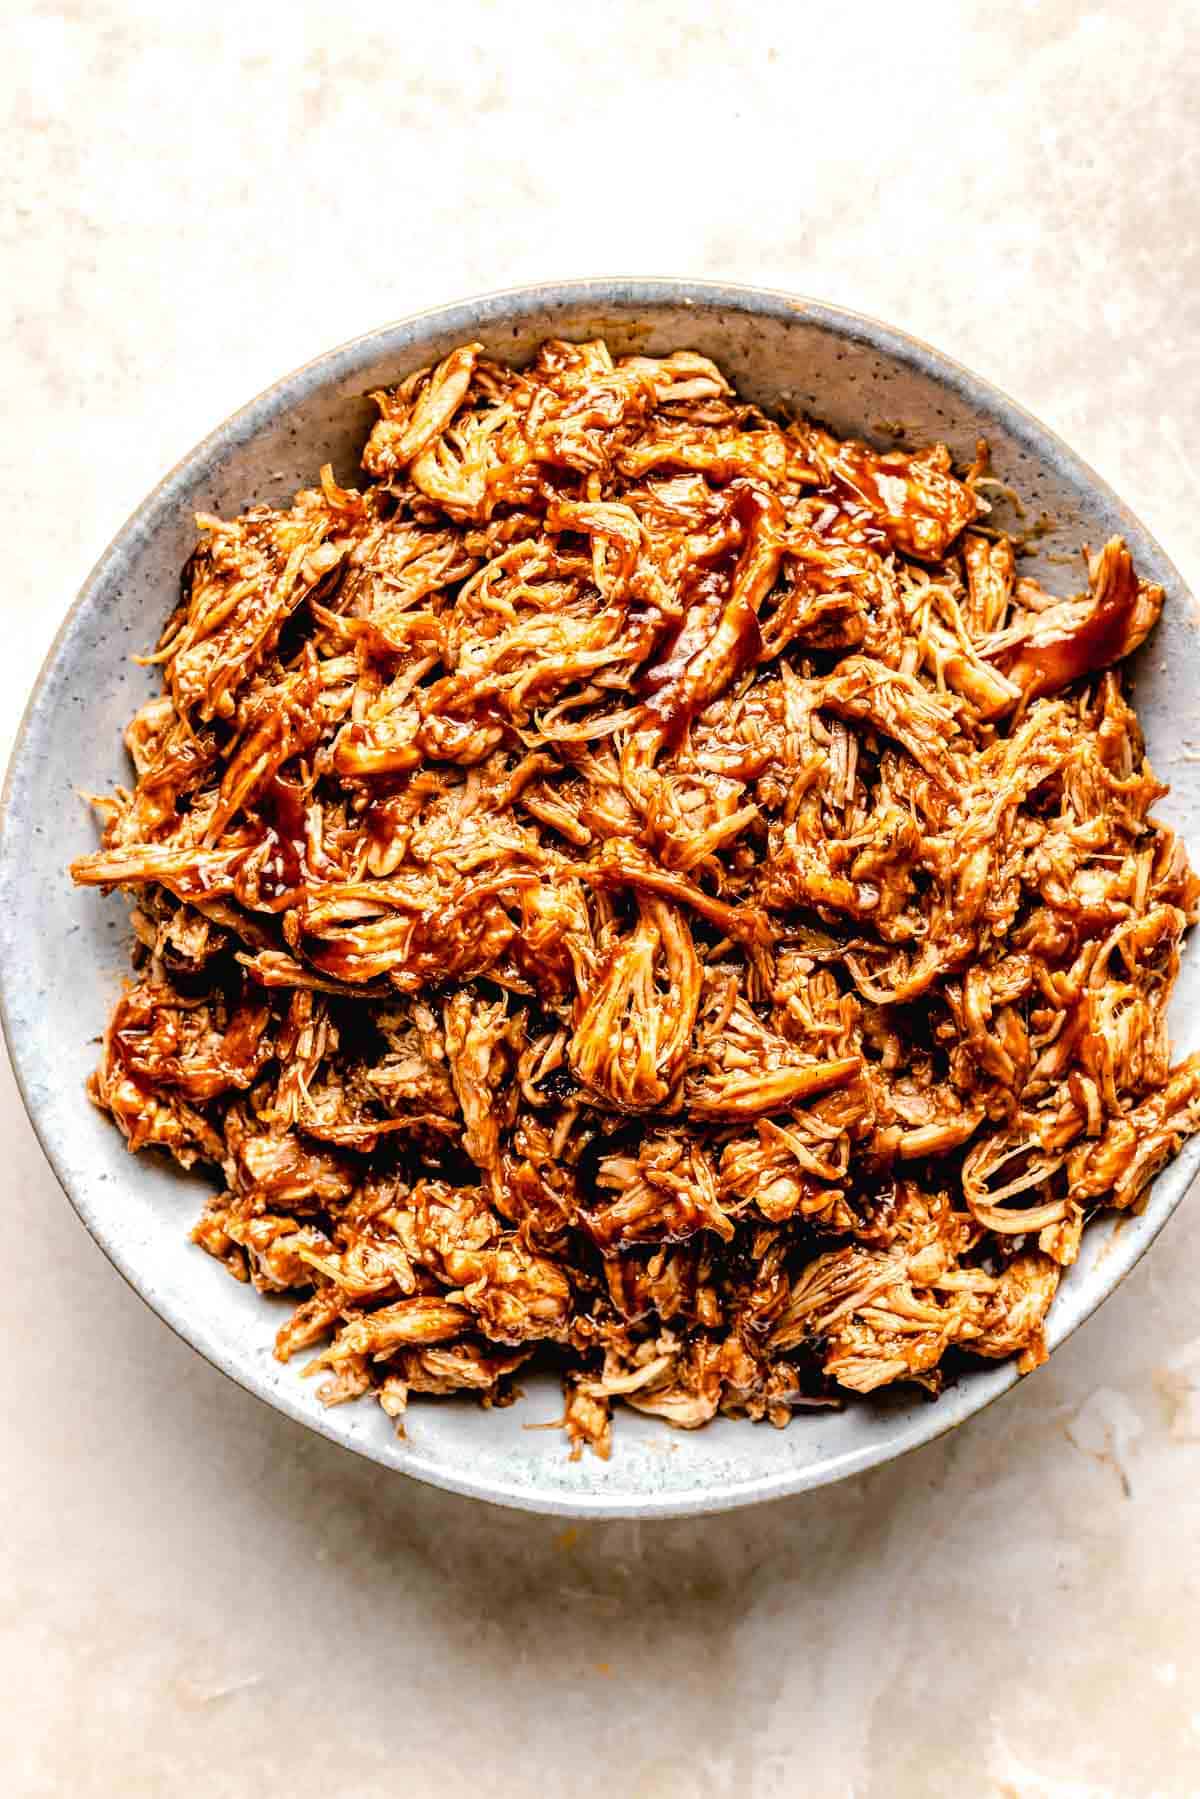 Mixing shredded pork with BBQ sauce,